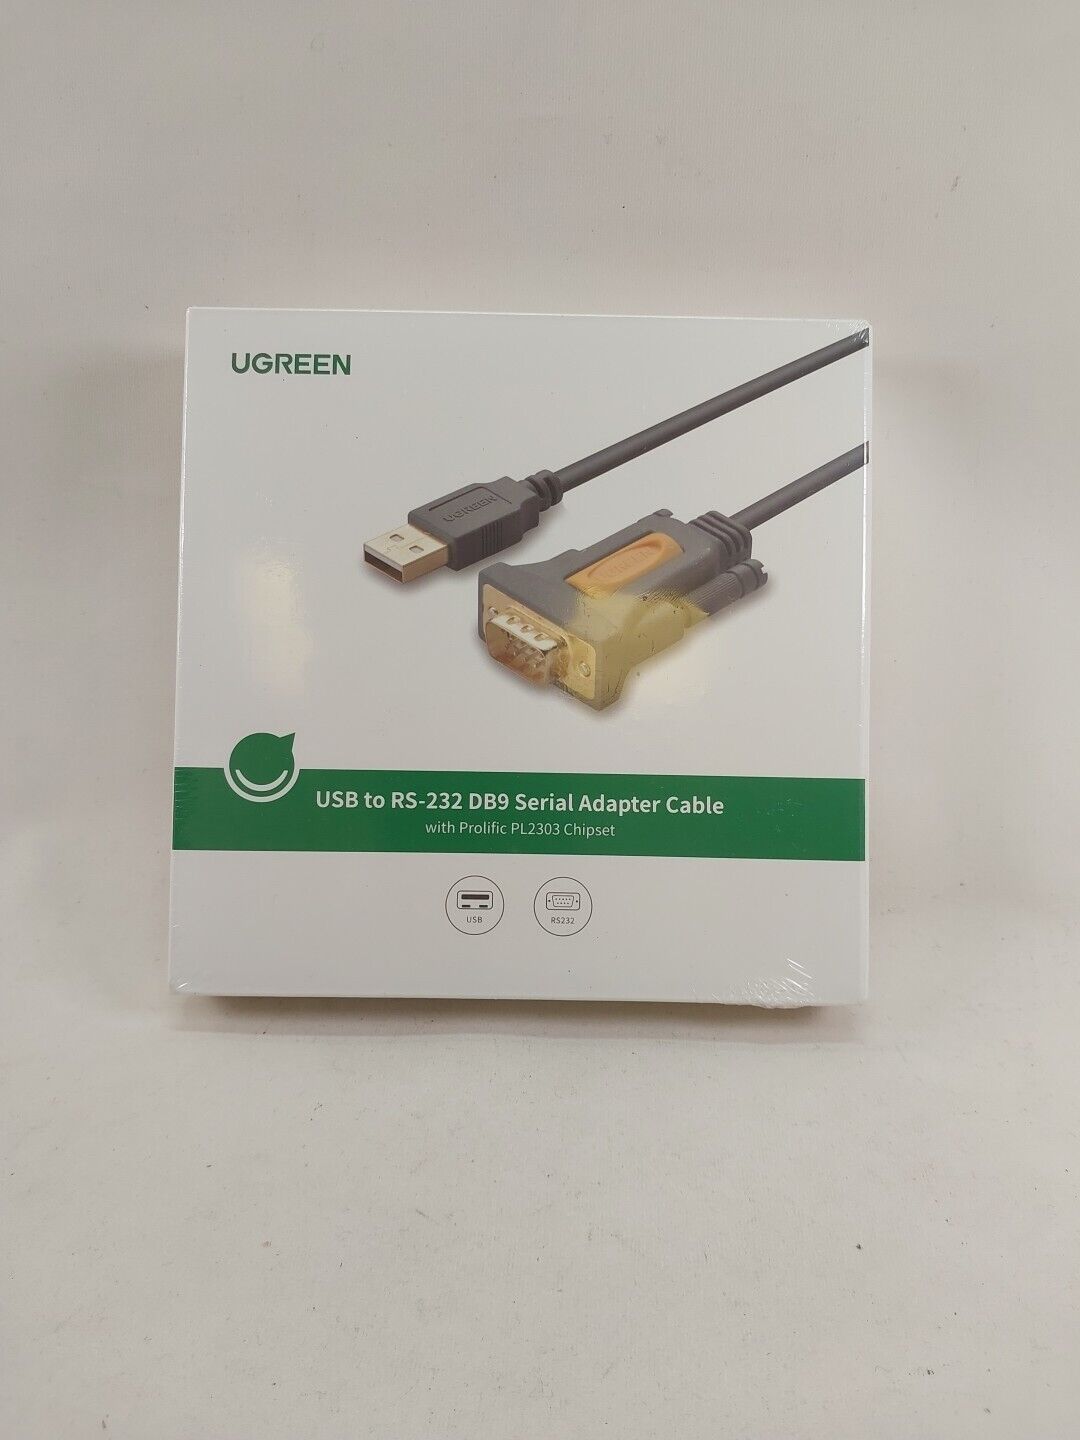 New UGREEN USB to RS232 Adapter Serial Cable DB9 Male 9 Pin PL2303 Chipset RS-2